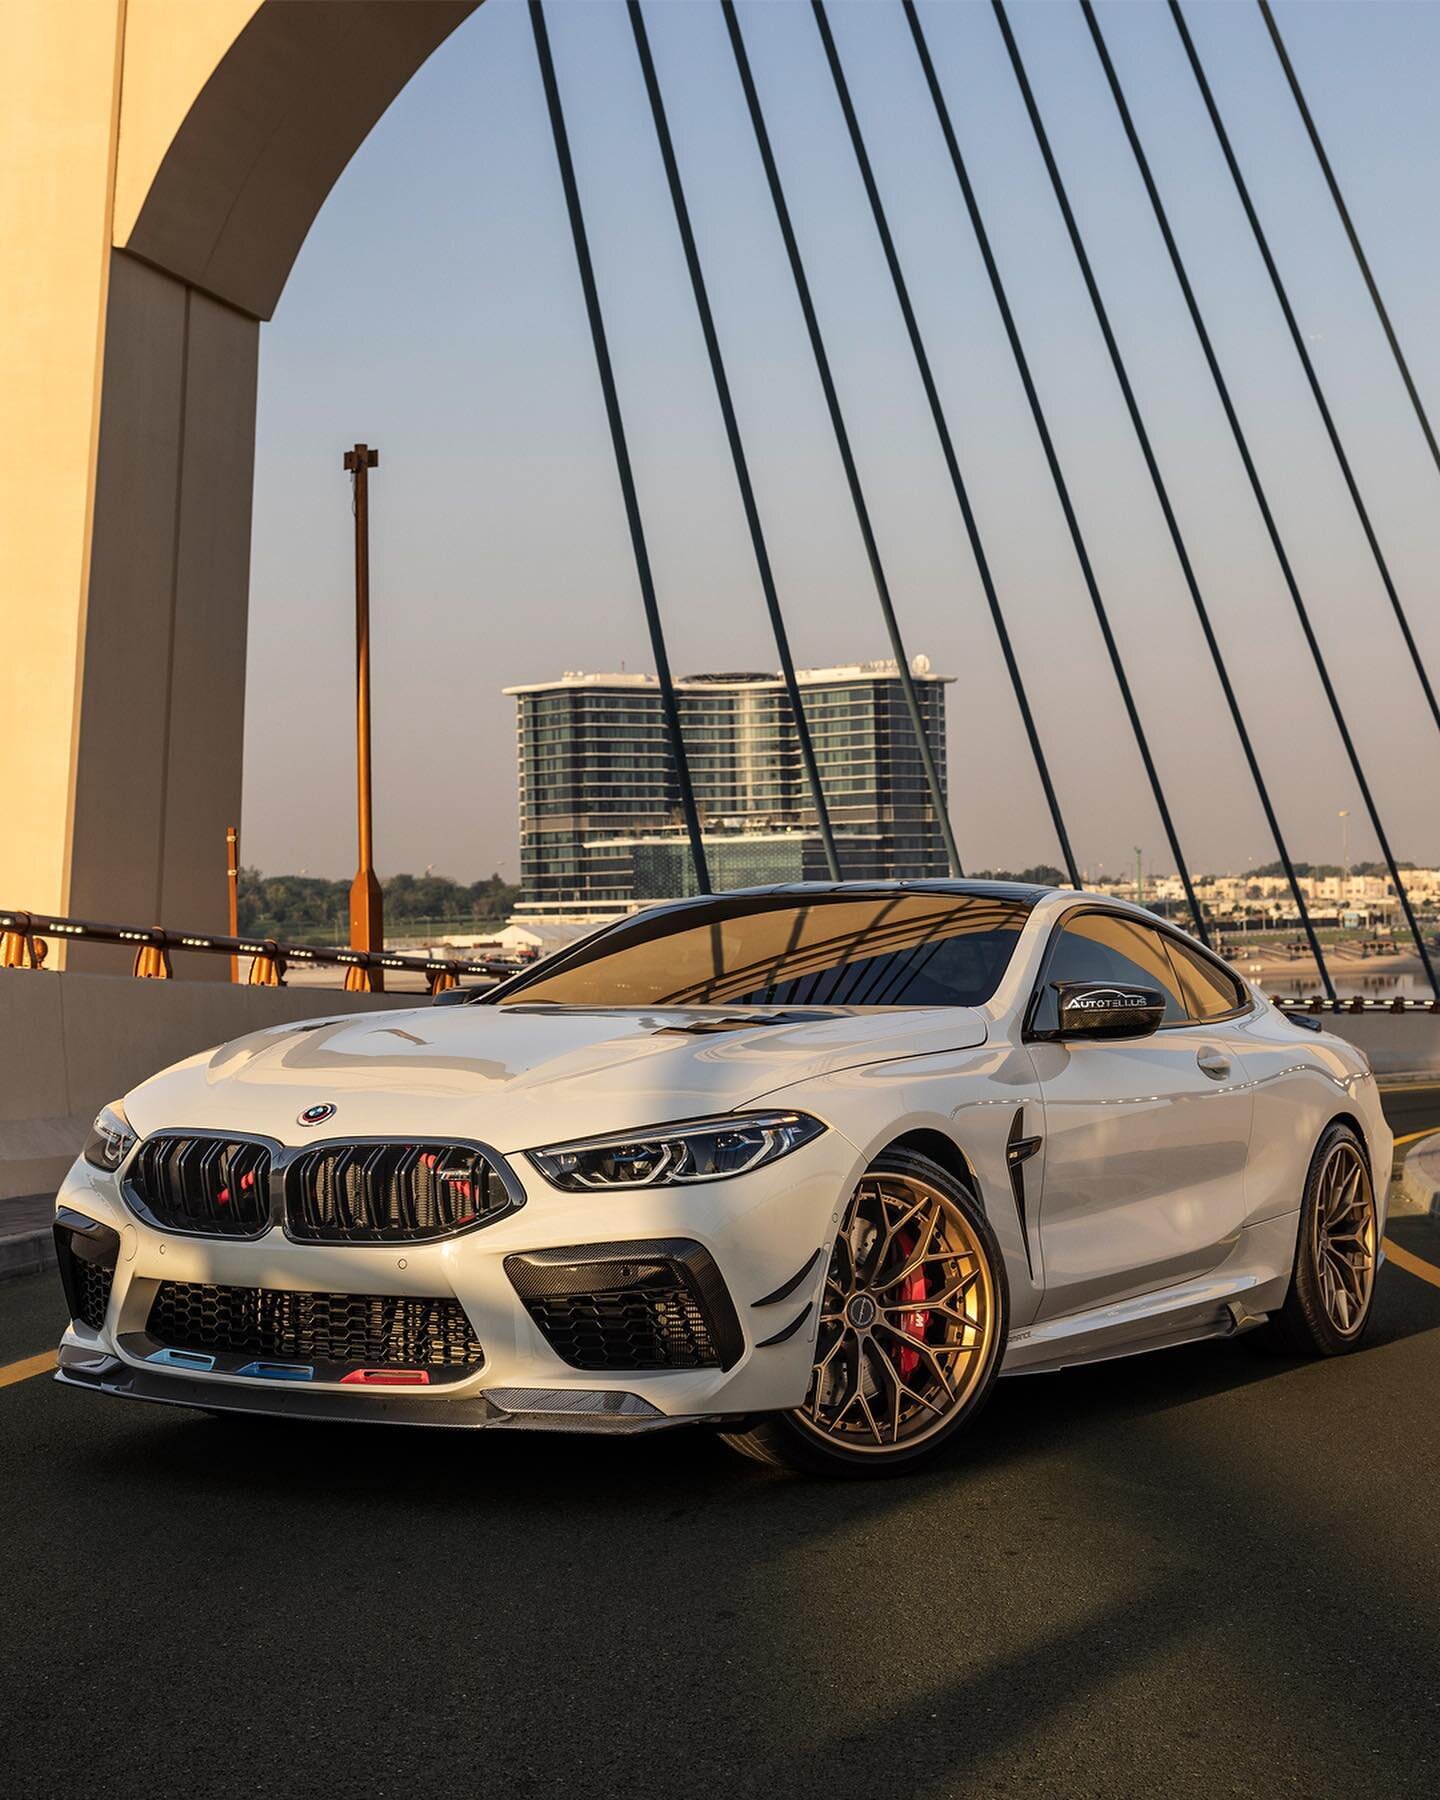 More from this gorgeous M8 Competition that you all seem to like so much. The stance, the wheels, that carbon aerokit and so much more in this car that makes it stand out. 

Thanks to our friends @knightsbridgeqatar for hooking us up with this beauty